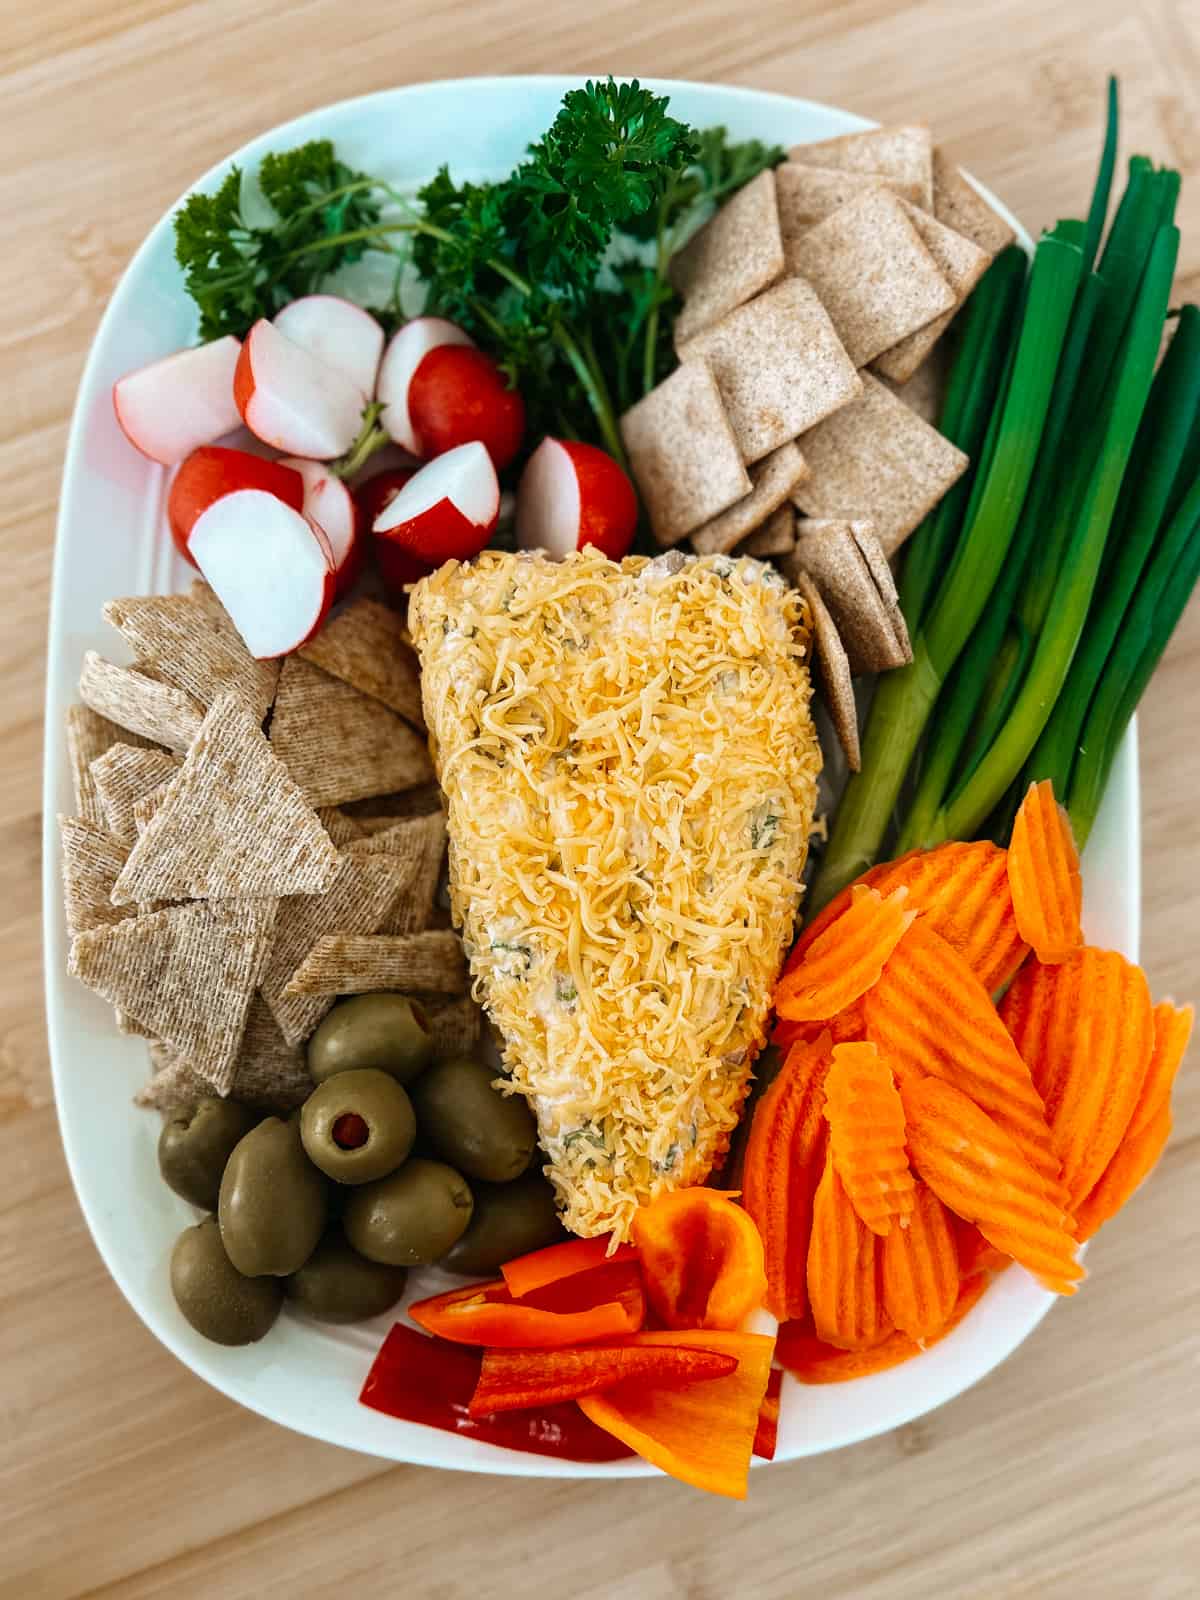 Cheese ball shaped like a carrot on a platter with veggies and crackers